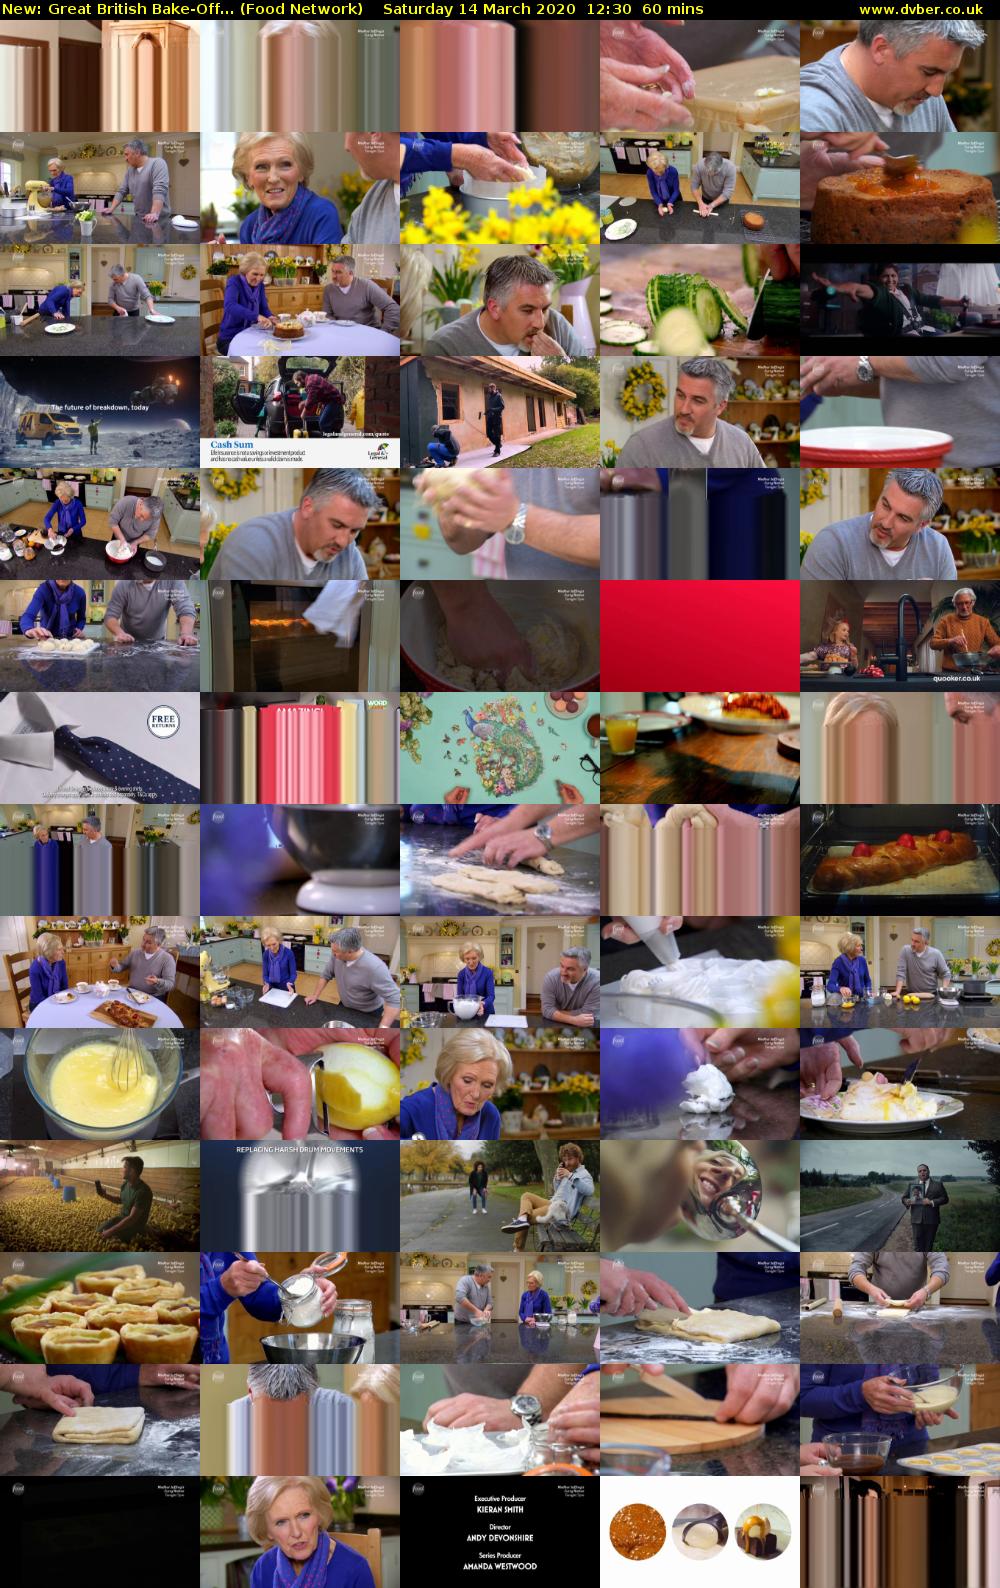 Great British Bake-Off... (Food Network) Saturday 14 March 2020 12:30 - 13:30